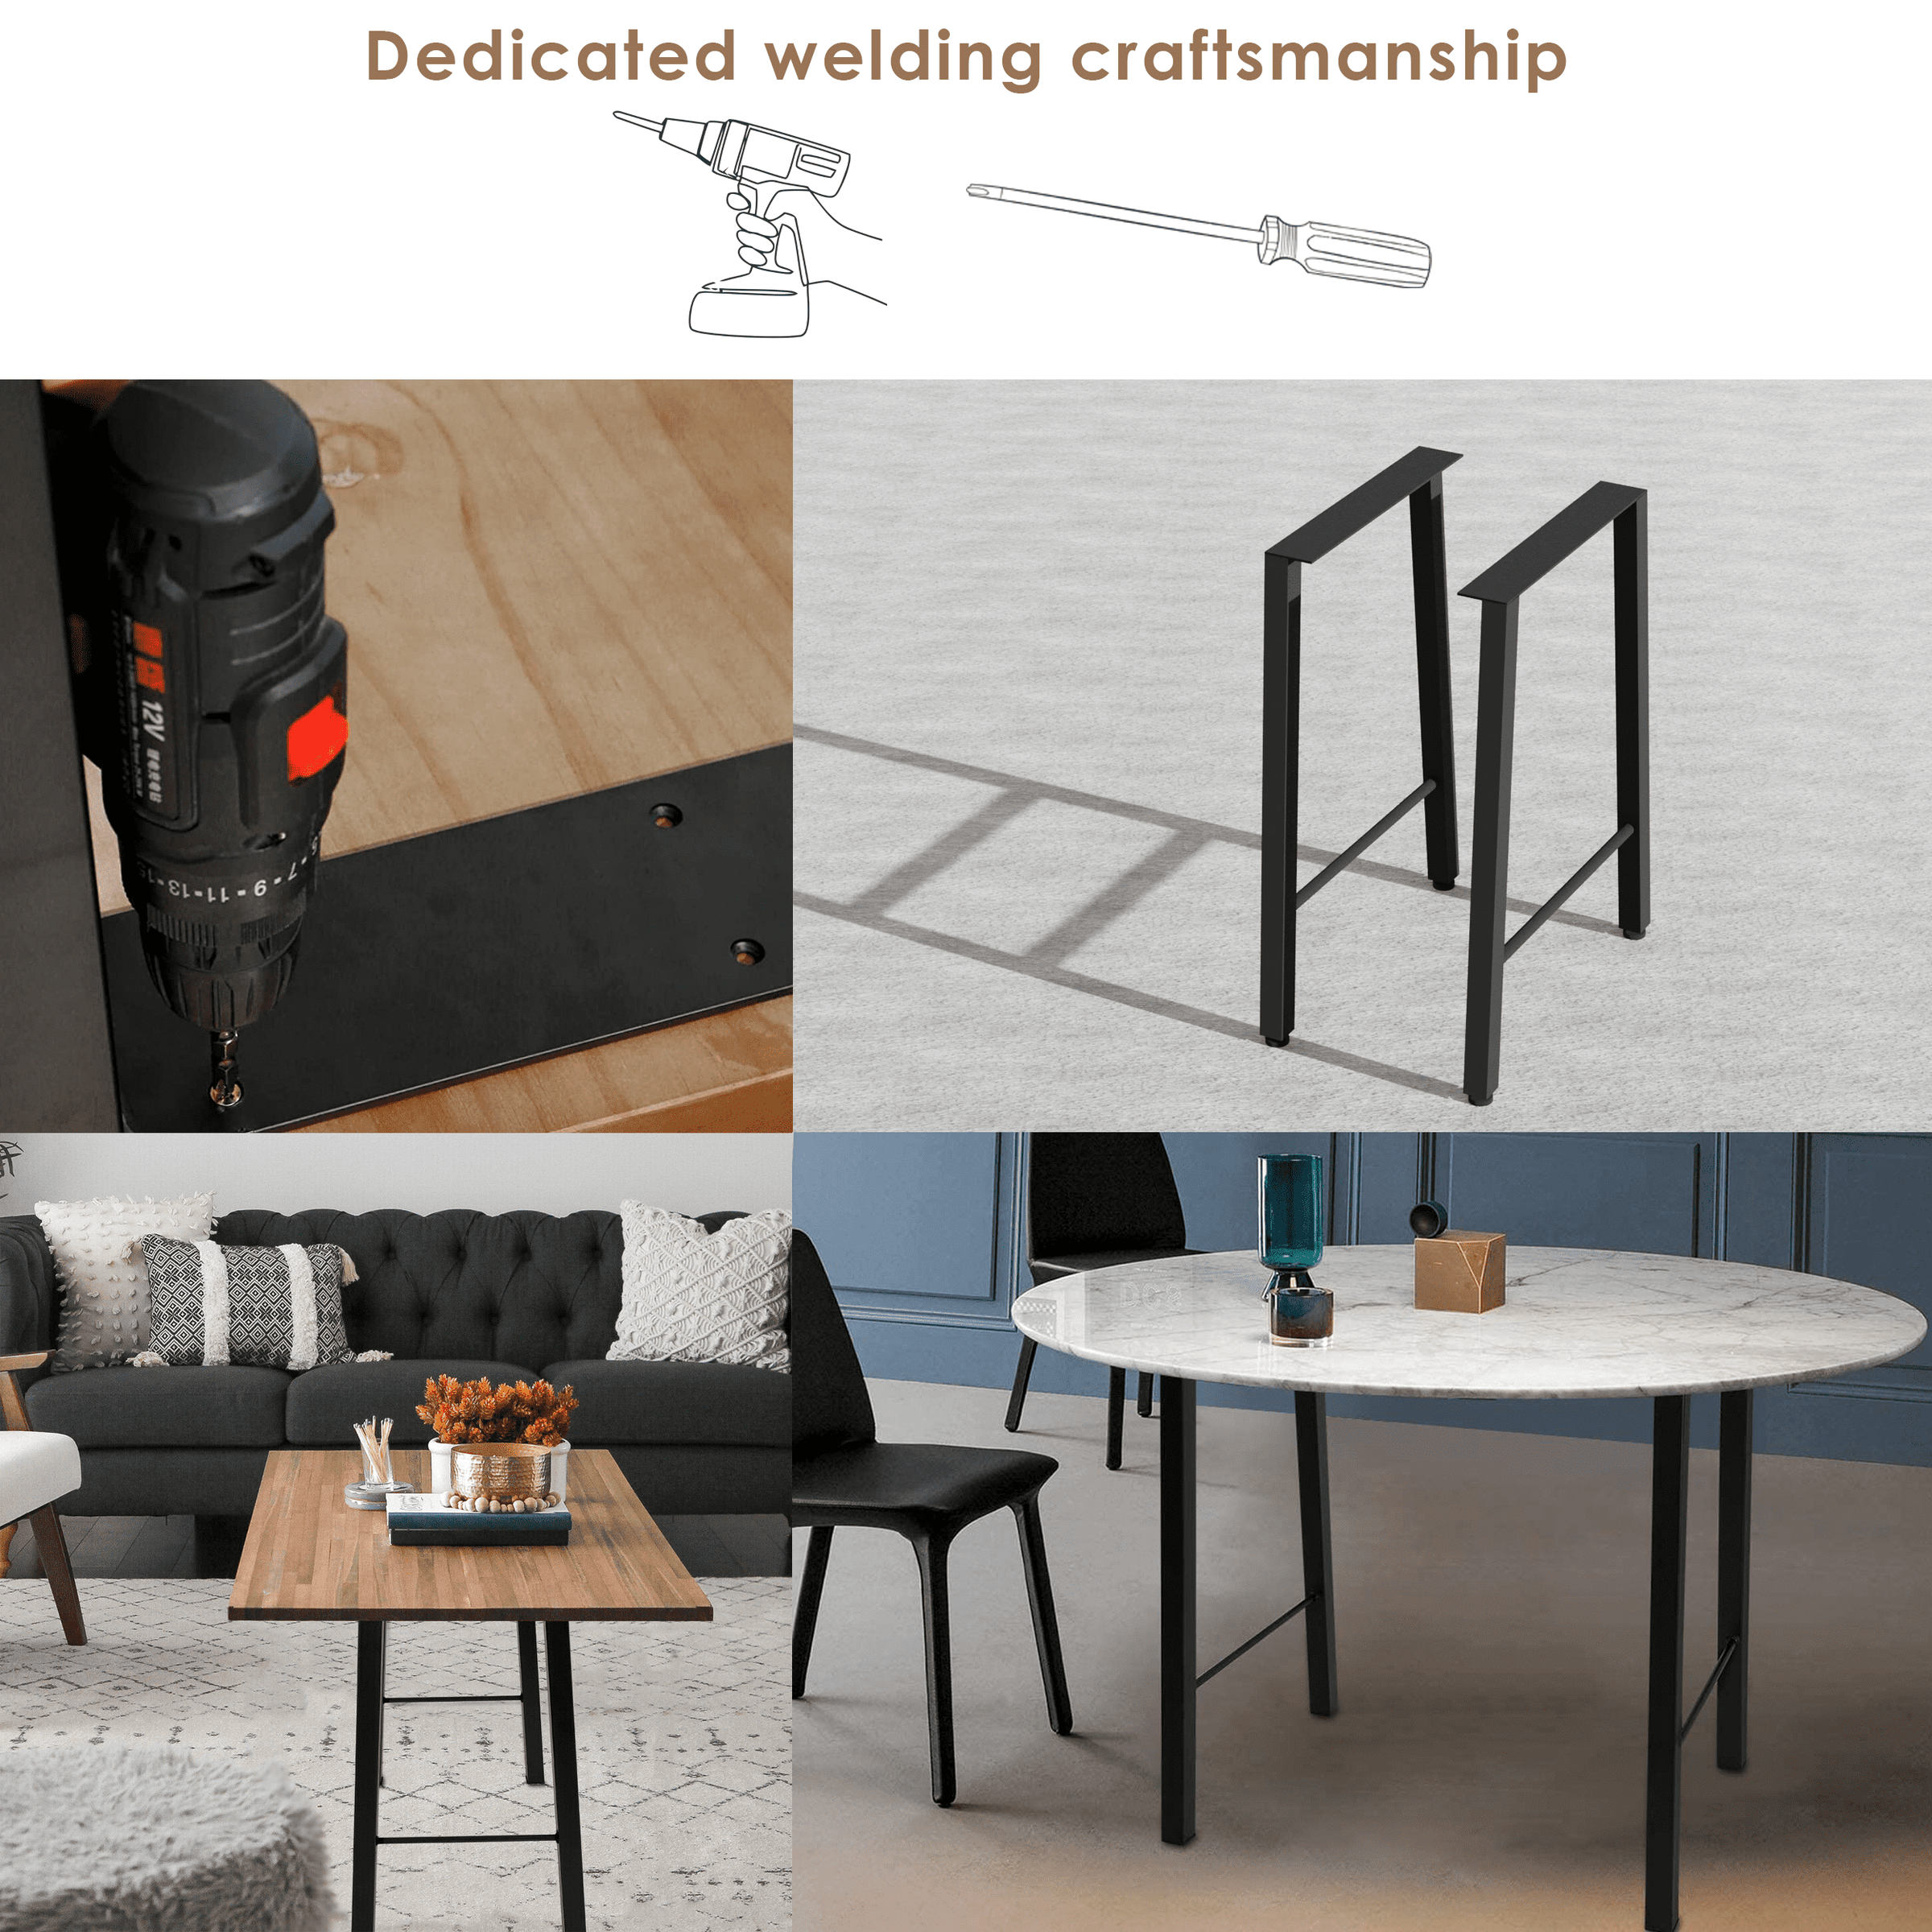 DearConcept - [28 x 17.7 in - TL1] Industrial Metal Table Legs, Metal Legs for Table